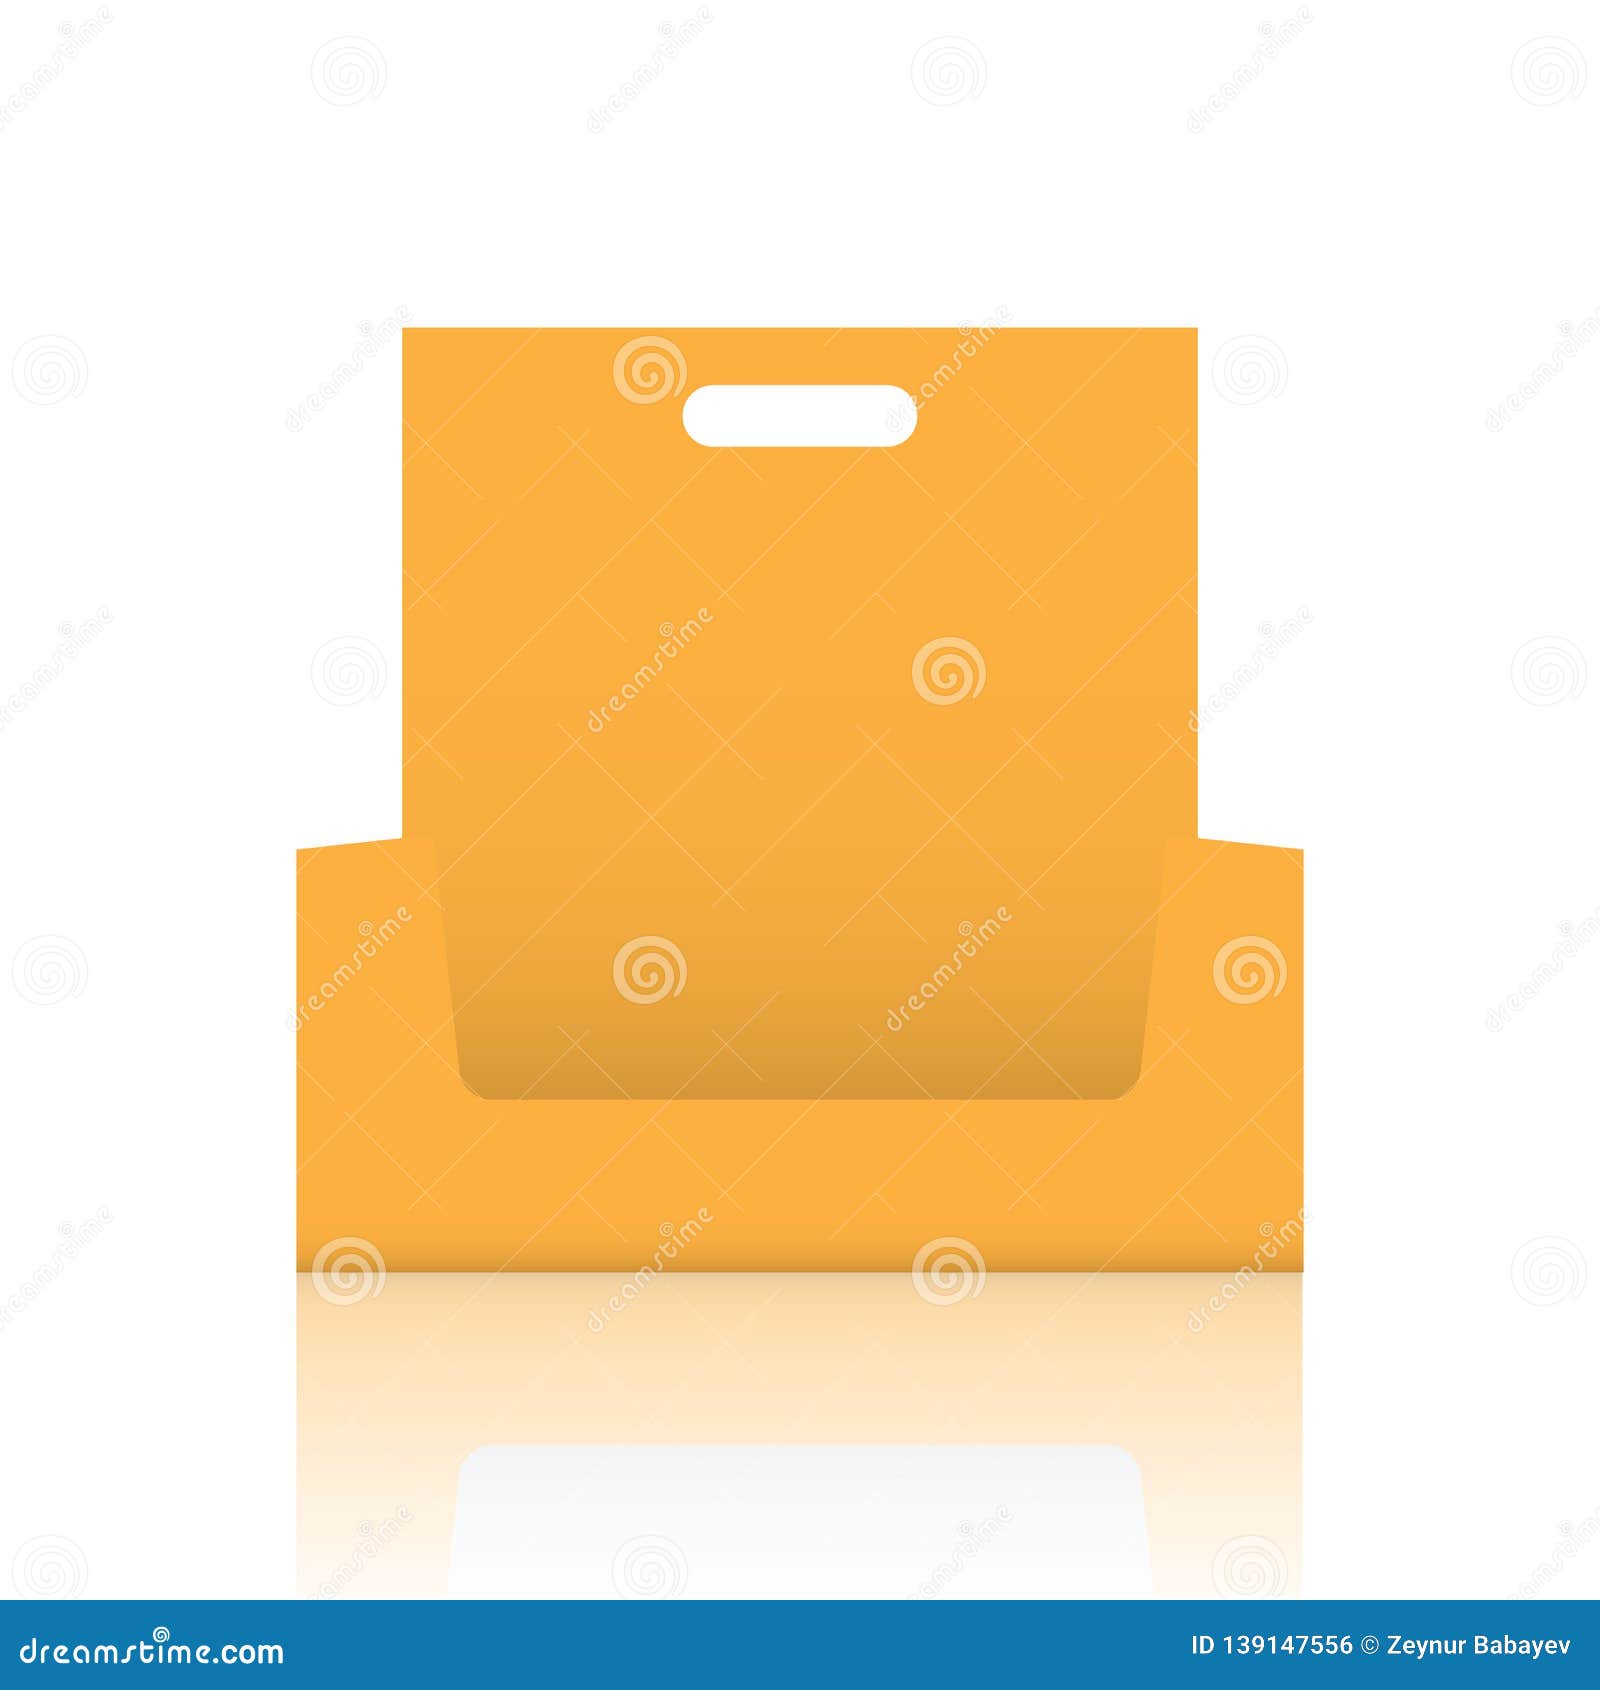 Download Empty Cardboard Display Box Mockup With Front Viewpoint ...